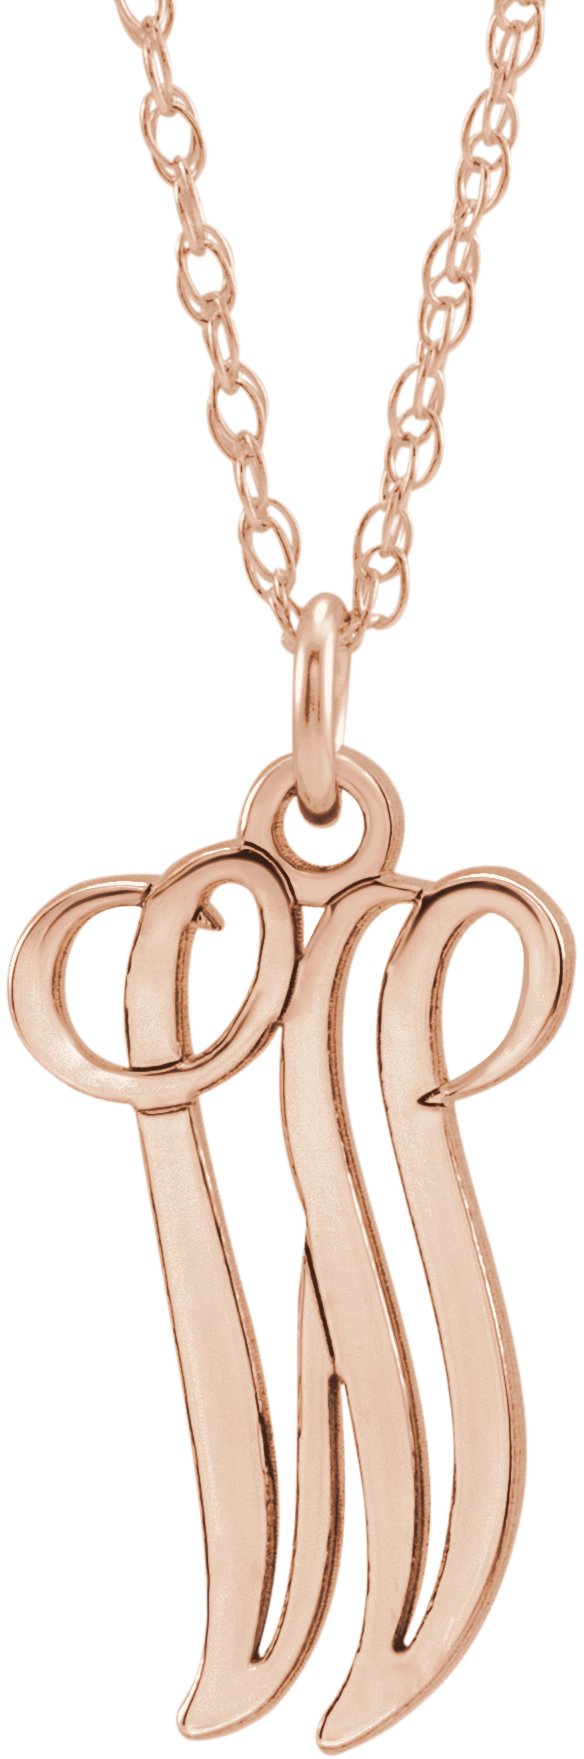 14K Rose Gold-Plated Sterling Silver Script Initial W 16-18" Necklace